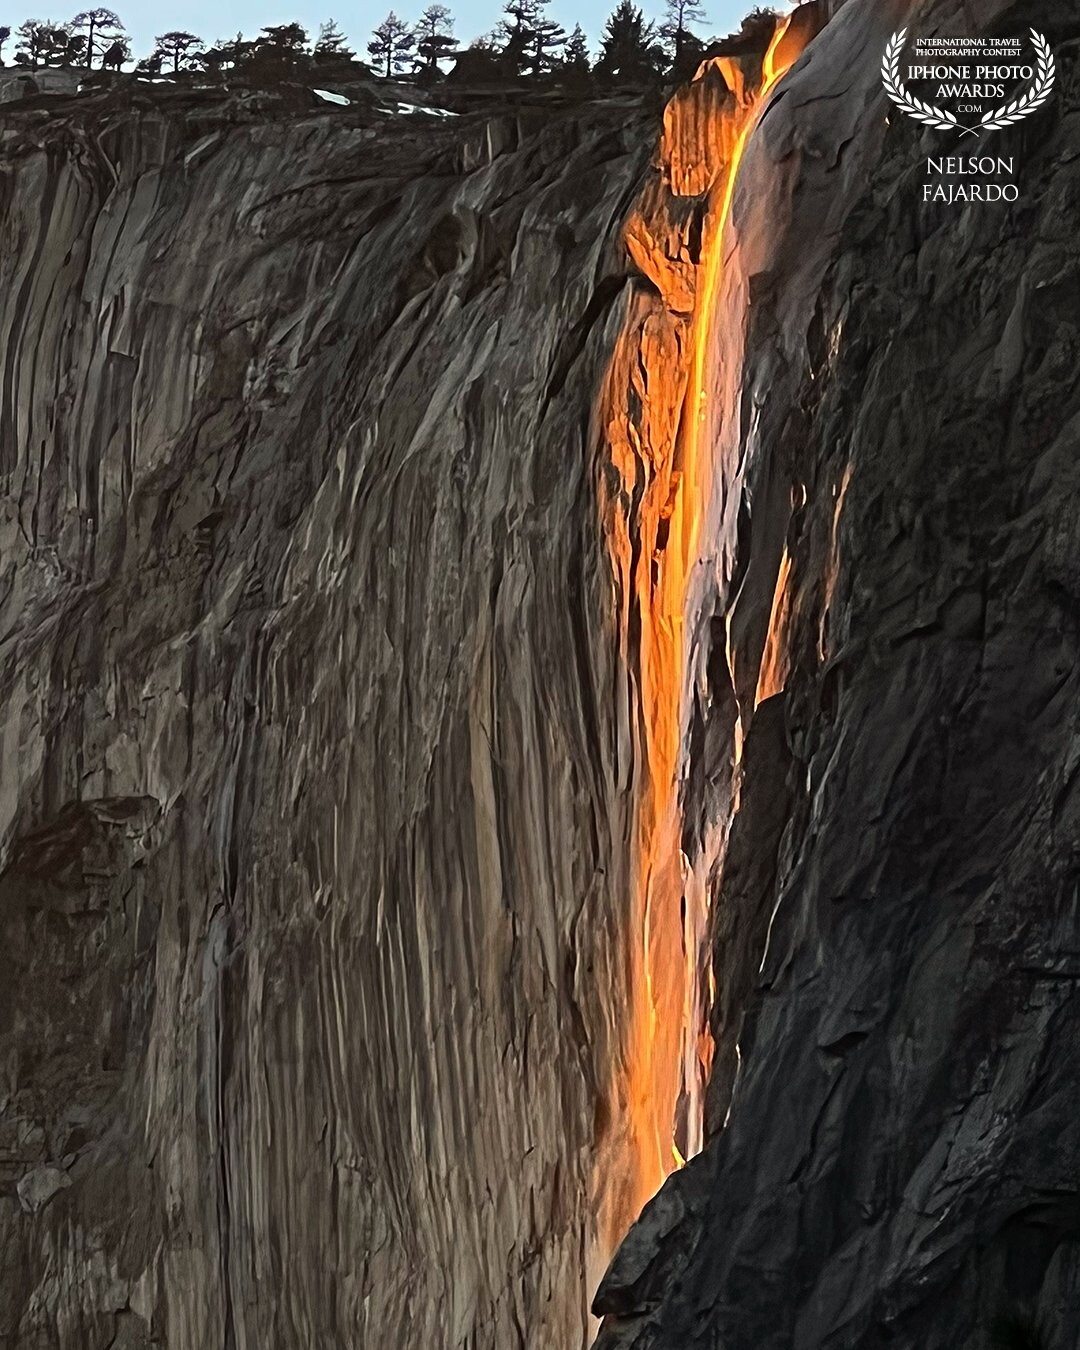 This is the phenomenal  fire fall or the horsetail fall that a lot of photographers (professional and nonprofessional) seek to take.